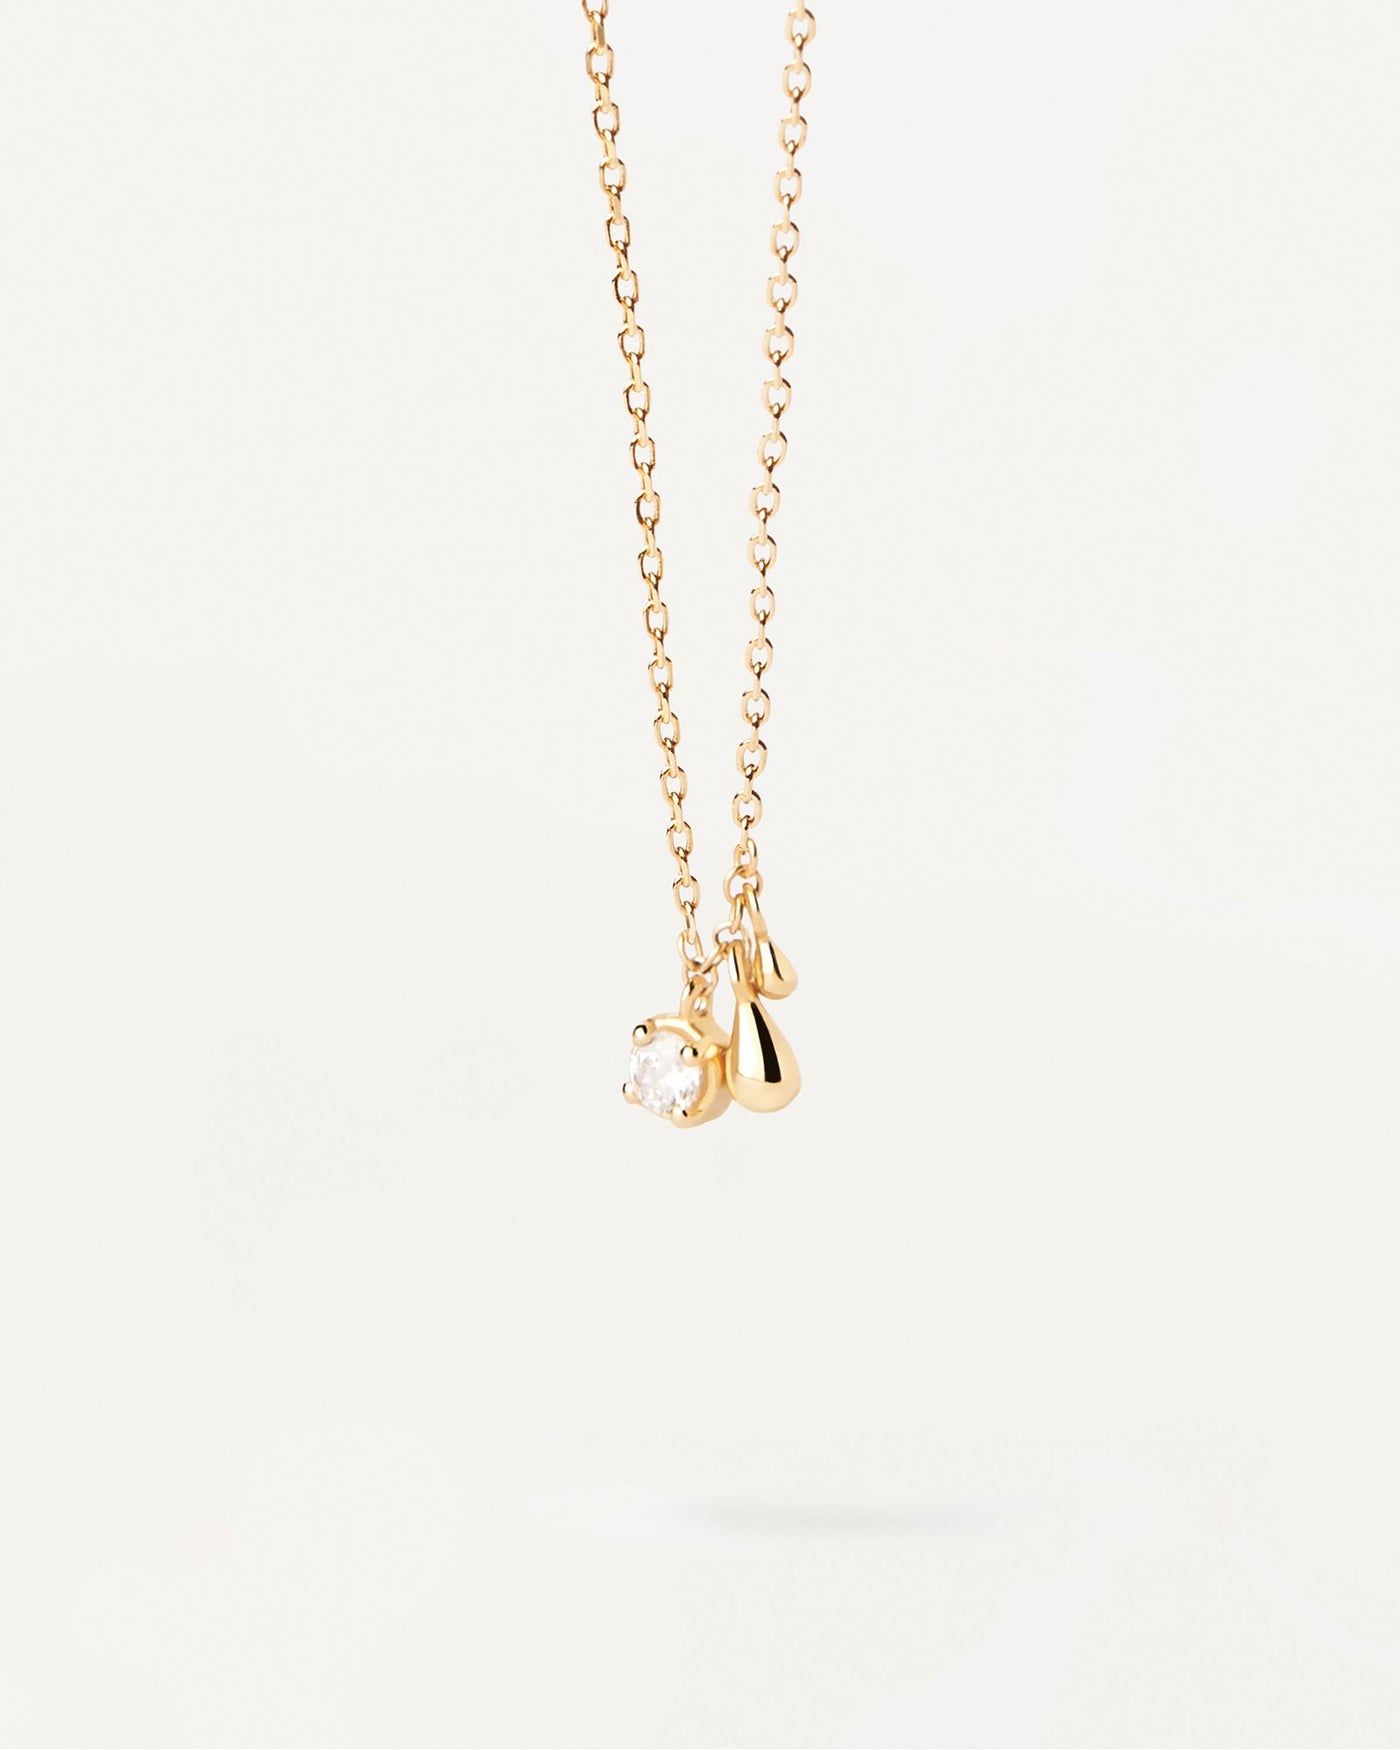 2024 Selection | Water Necklace. Gold-plated silver necklace with white zirconia and two small drop pendants. Get the latest arrival from PDPAOLA. Place your order safely and get this Best Seller. Free Shipping.